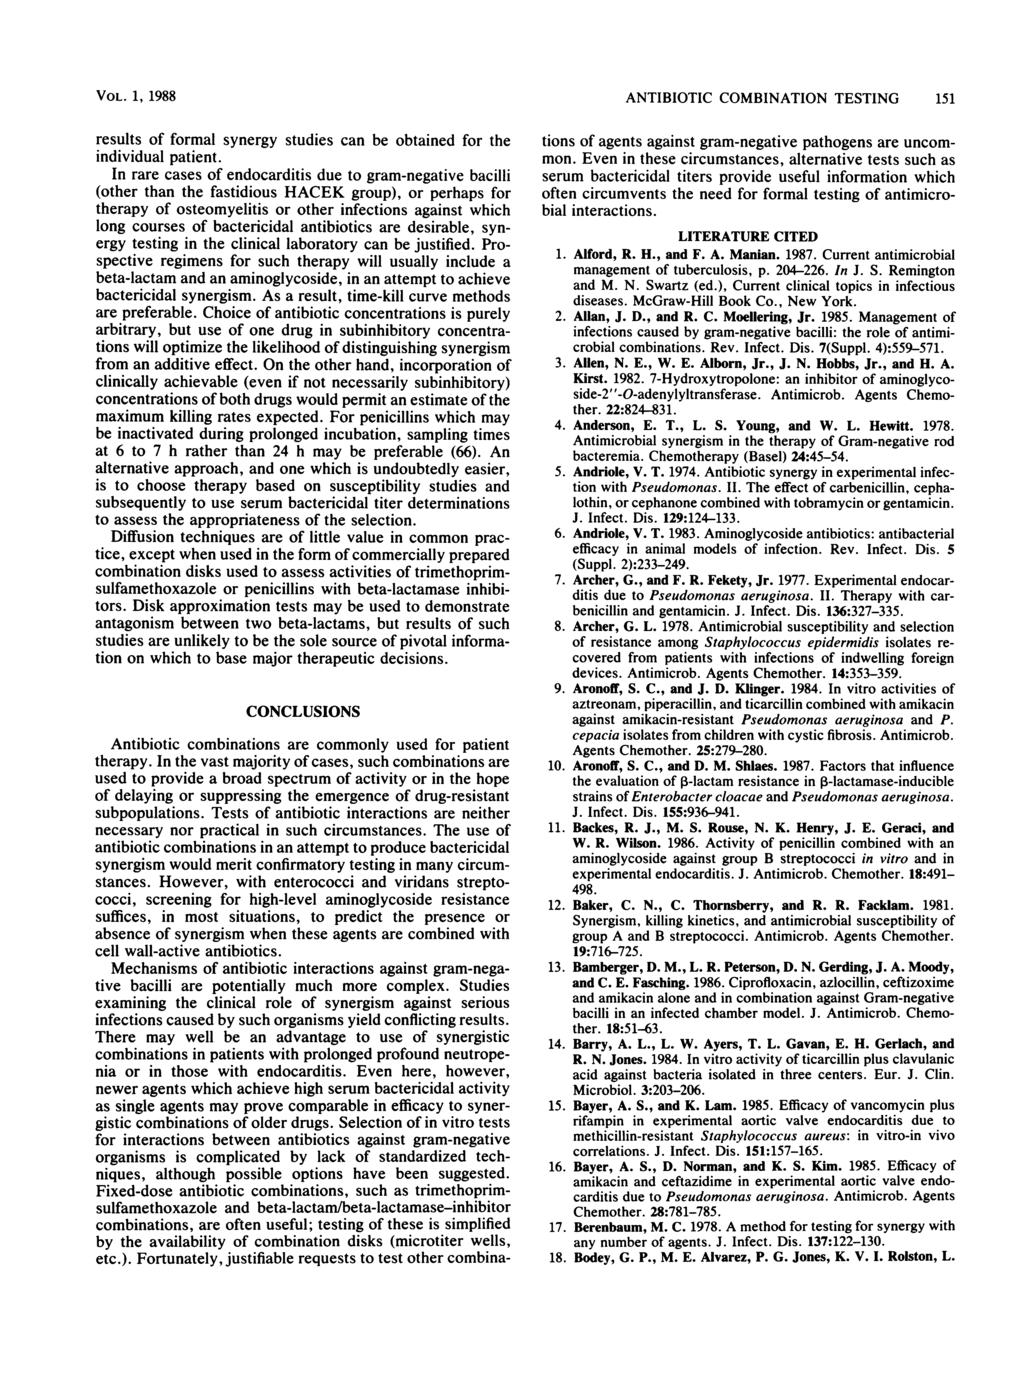 VOL. 1, 1988 results of formal synergy studies can be obtained for the individual patient.